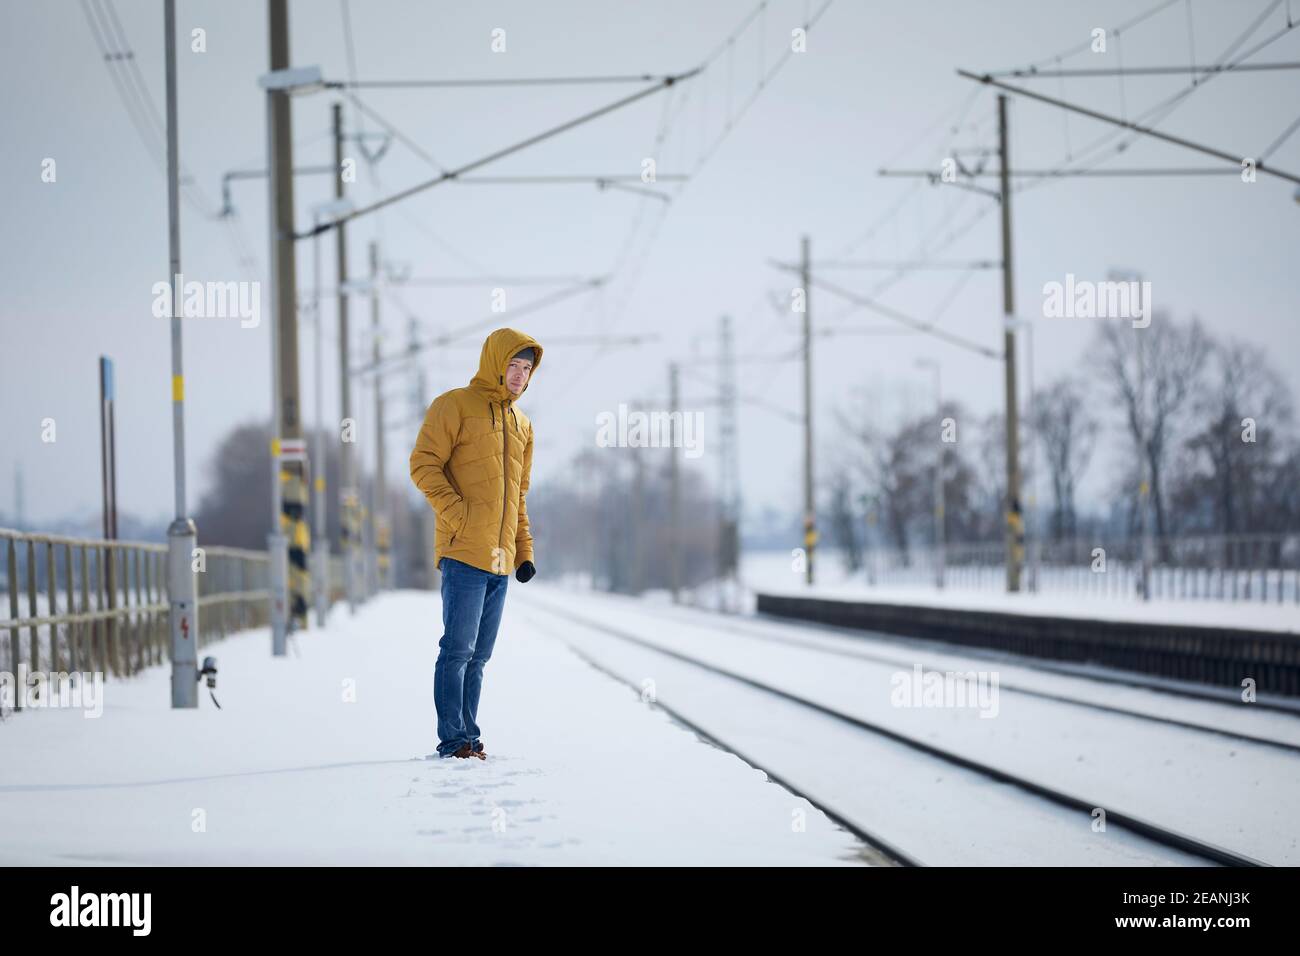 Snowy railroad station during frosty day. Man standing on platform and waiting for delayed train. Stock Photo